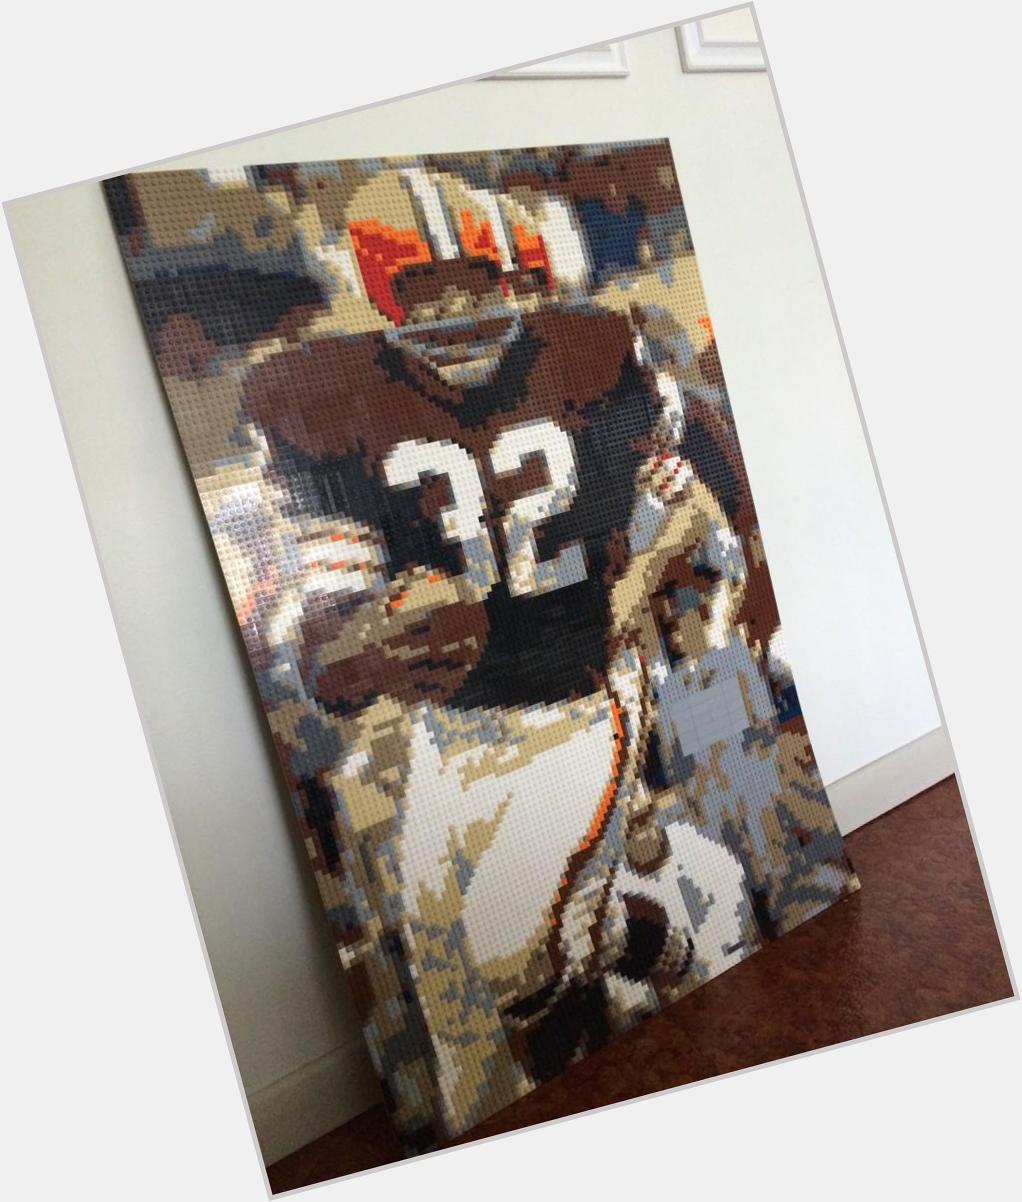 Happy Birthday to one of the greatest running backs. Cleveland\s own Jim Brown. Here is a LEGO mosaic I made of him 